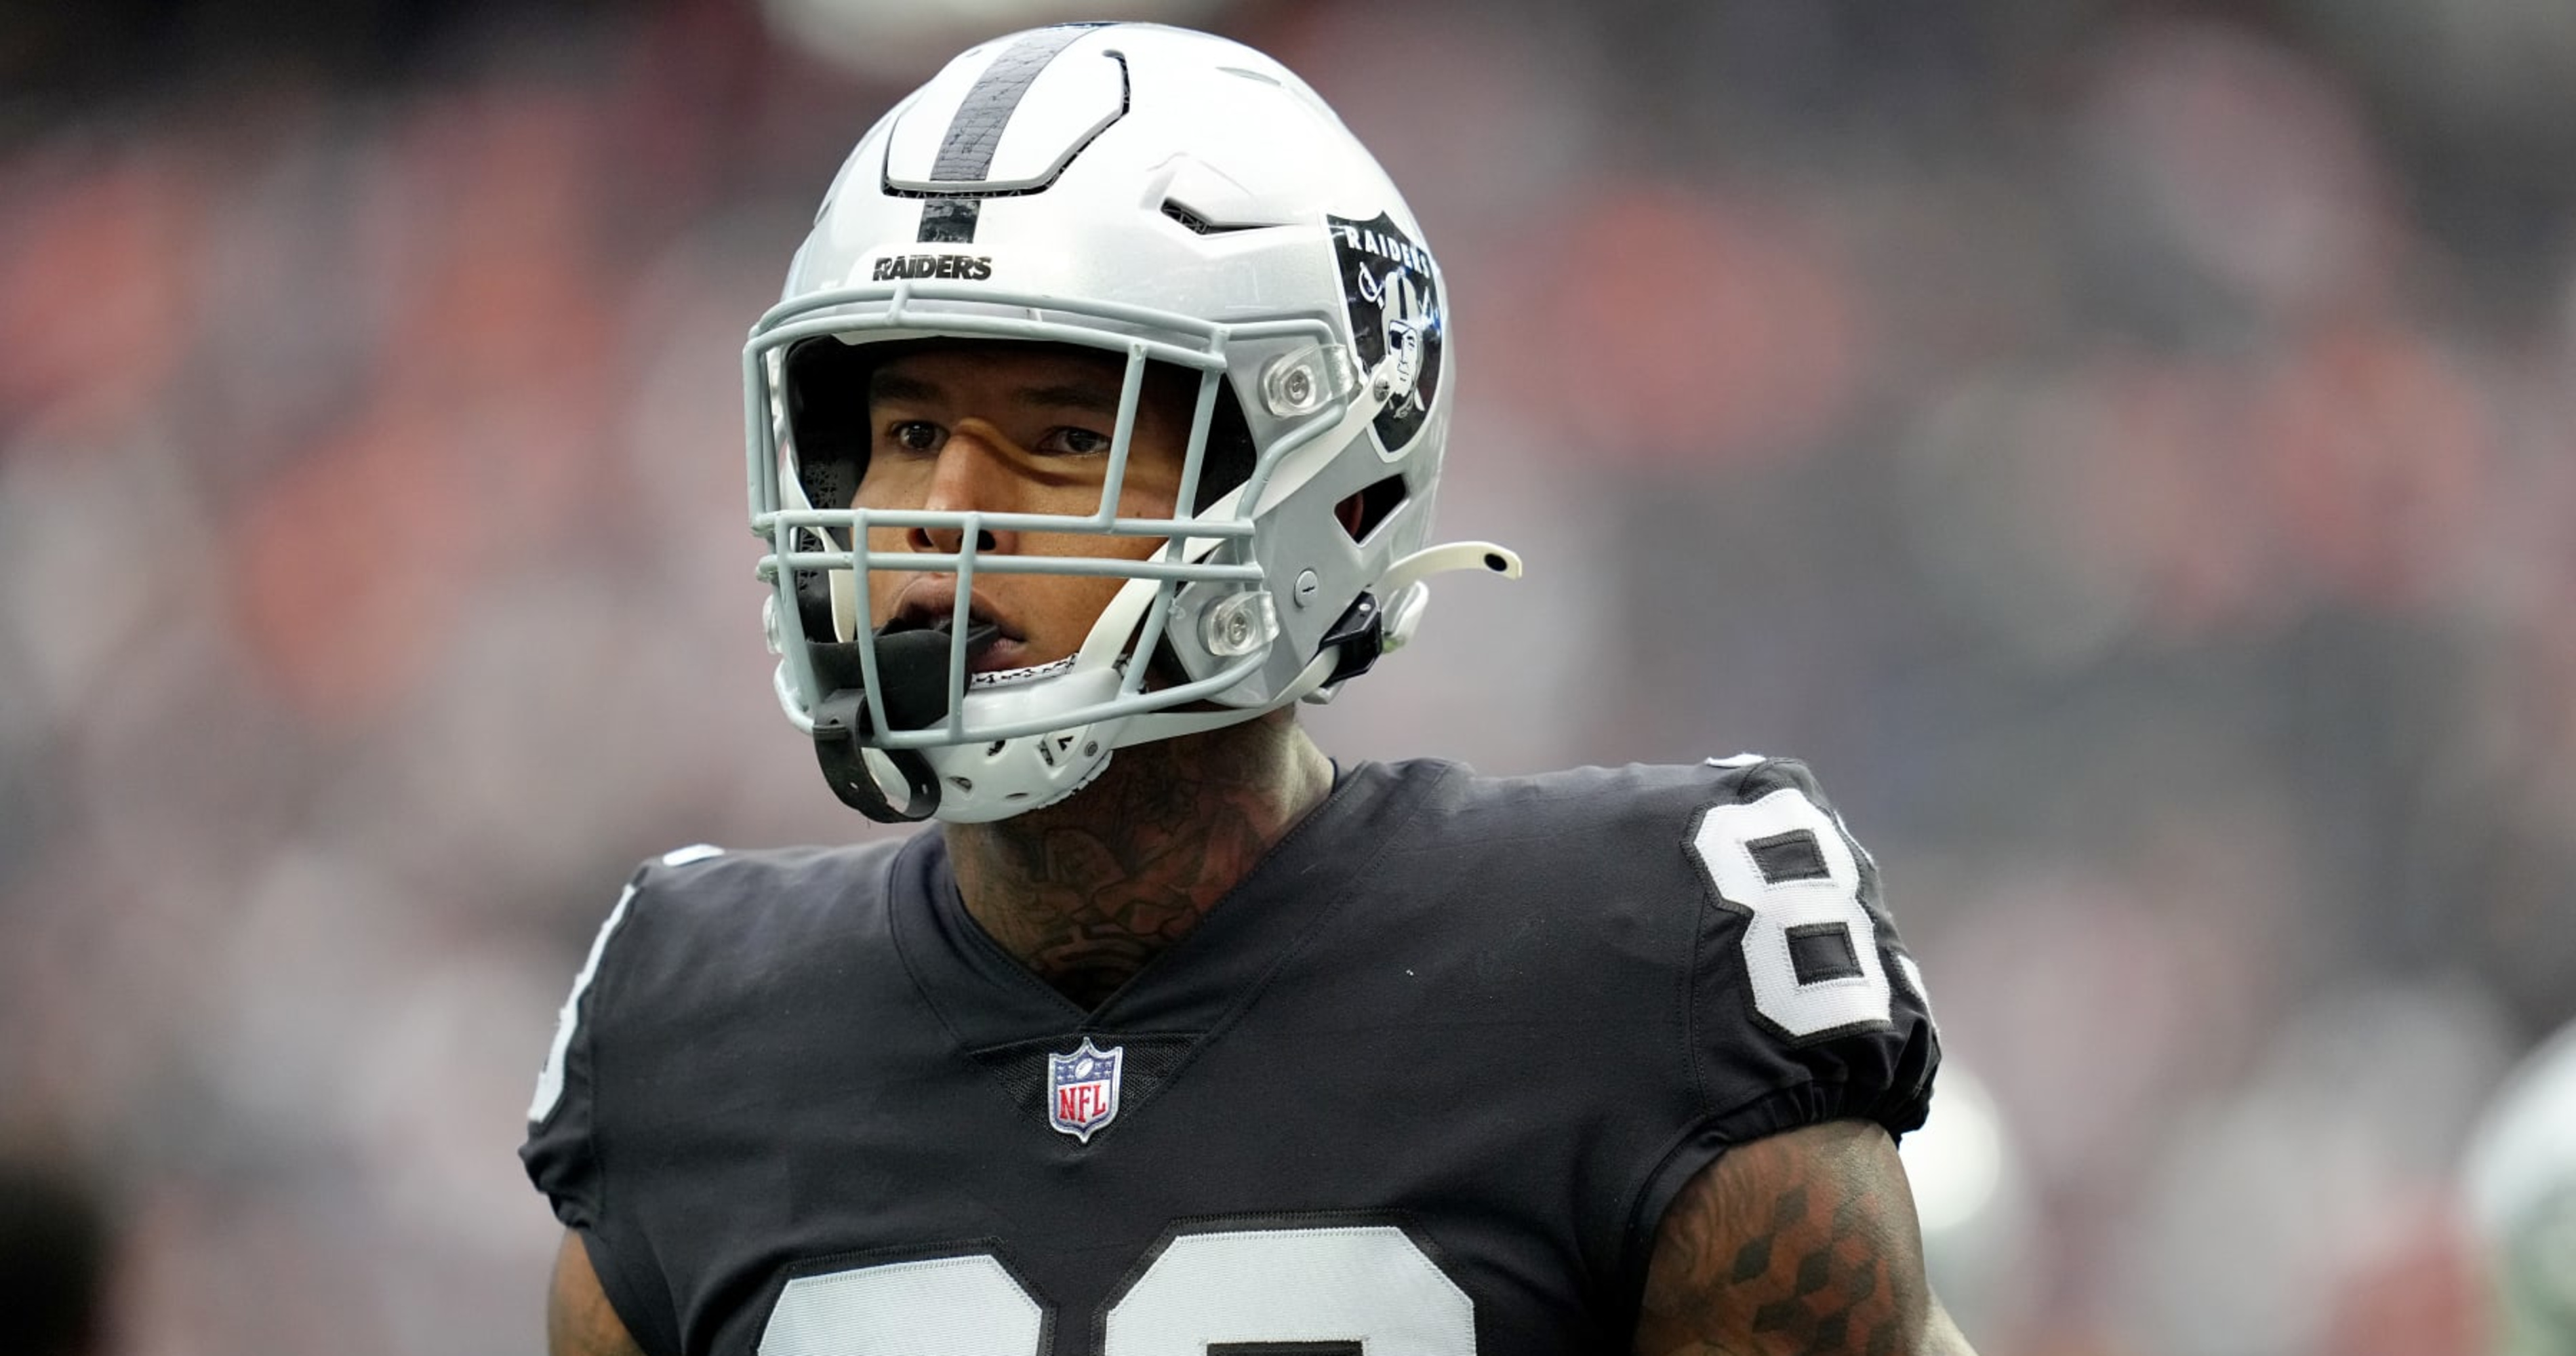 Raiders' Darren Waller Says He's 'Likely Out' vs. Texans with Hamstring Injury